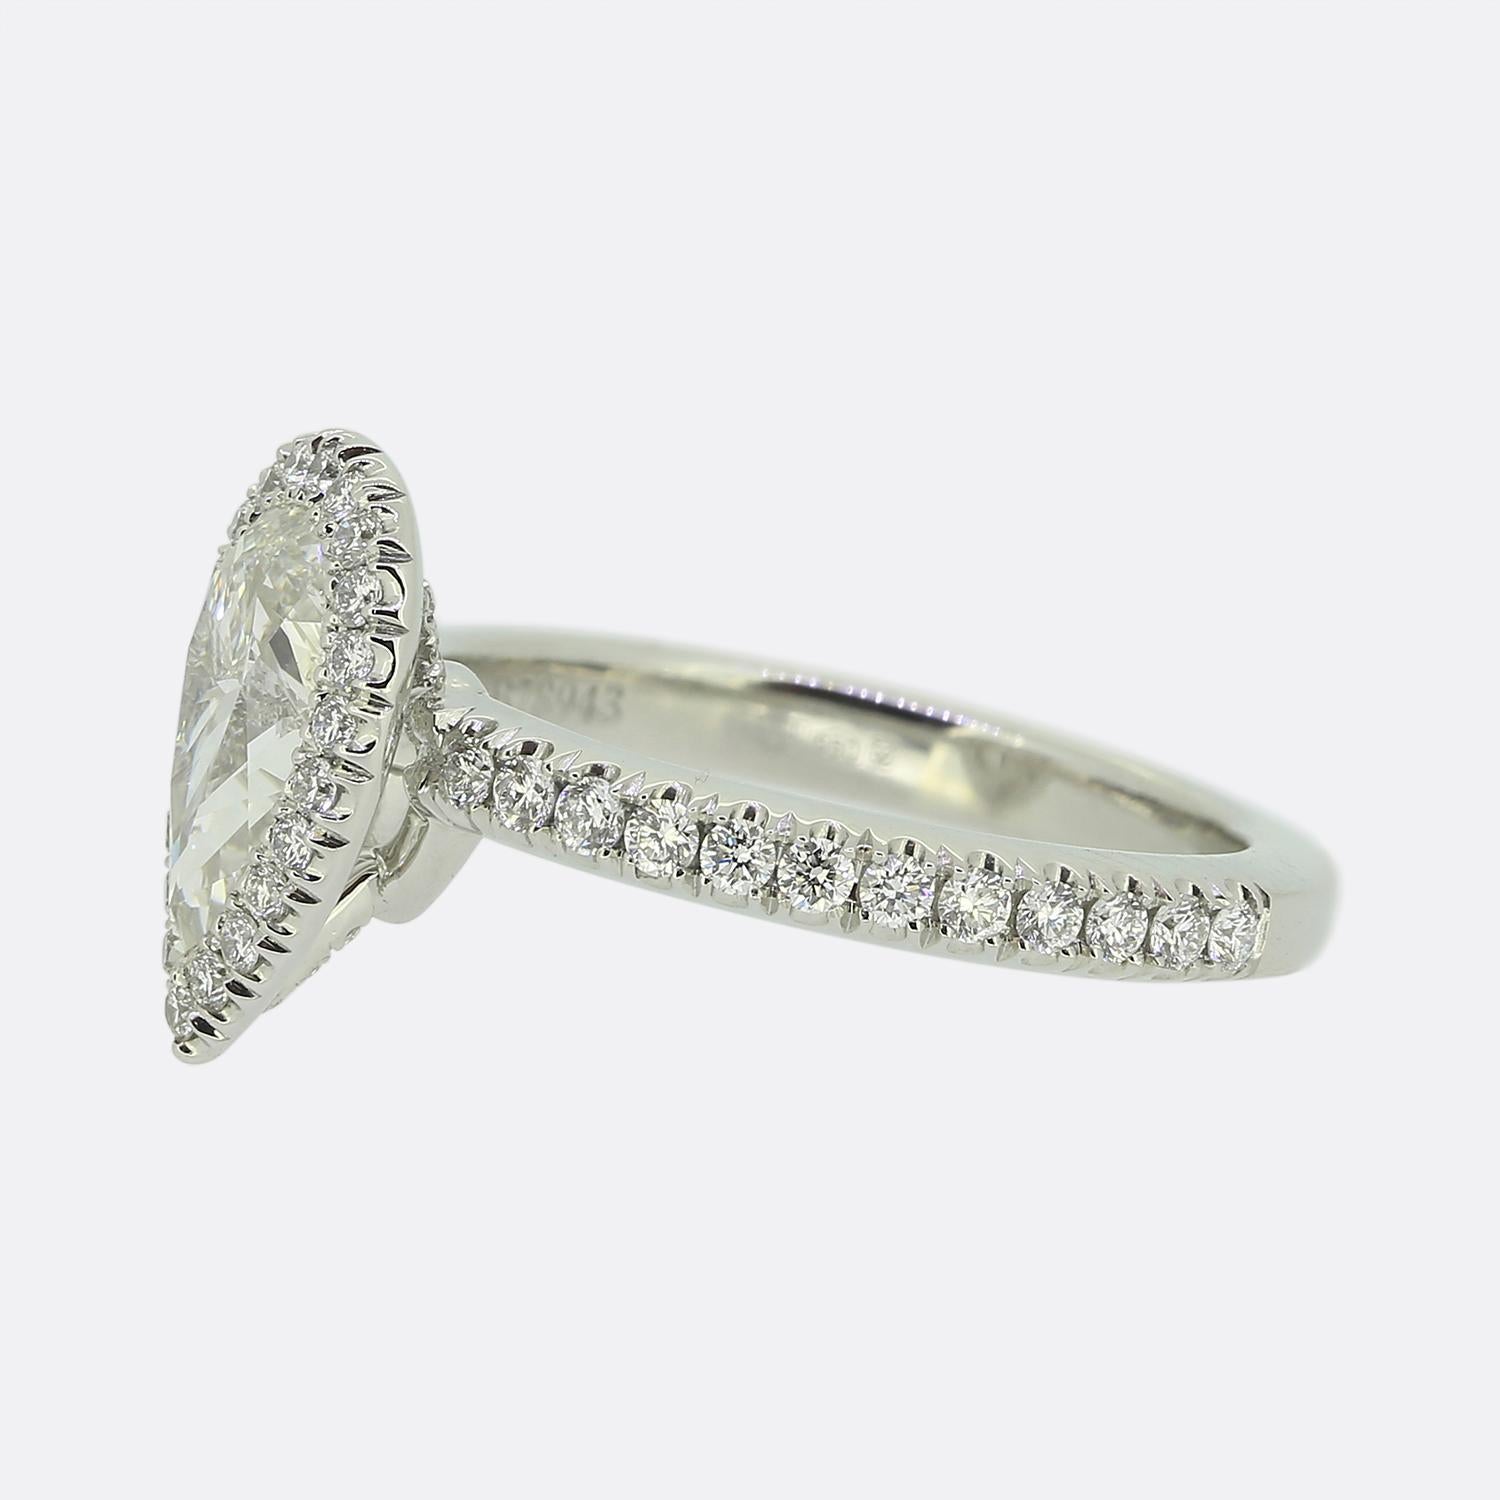 Here we have an outstanding diamond engagement ring from the world renowned diamond group, De Beers. This platinum piece showcases a delightful 0.88 carat pear cut diamond which sits proud at the centre of the face and is surrounded by a single row